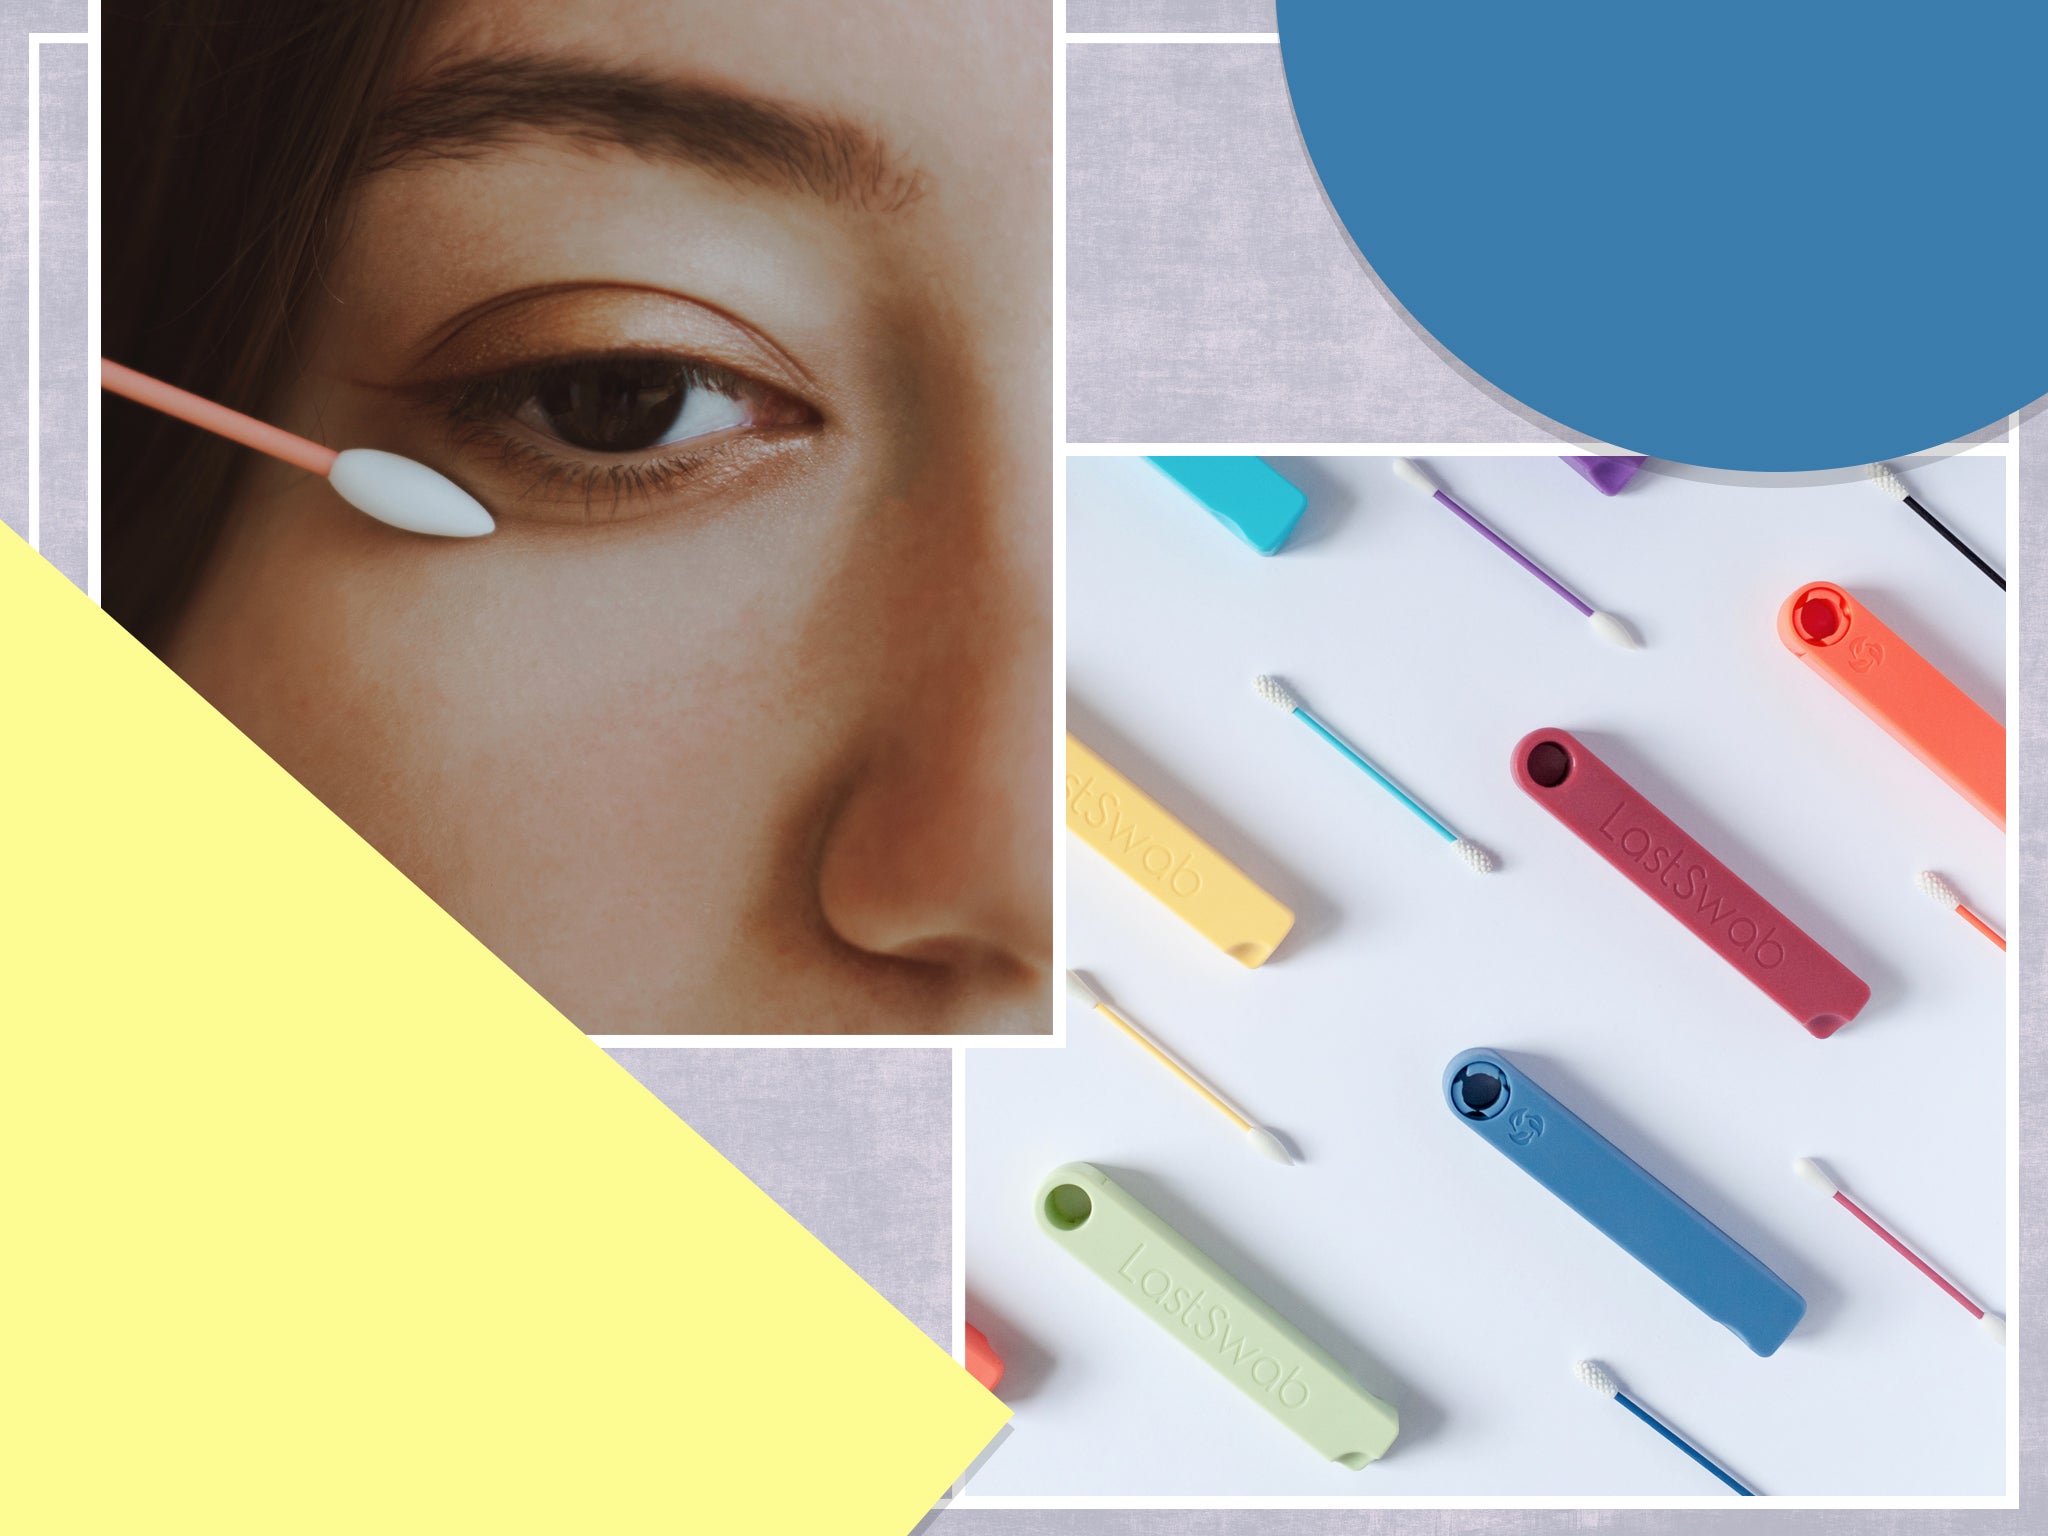 This Reusable Q-Tip is the Last One You'll Ever Need to Buy